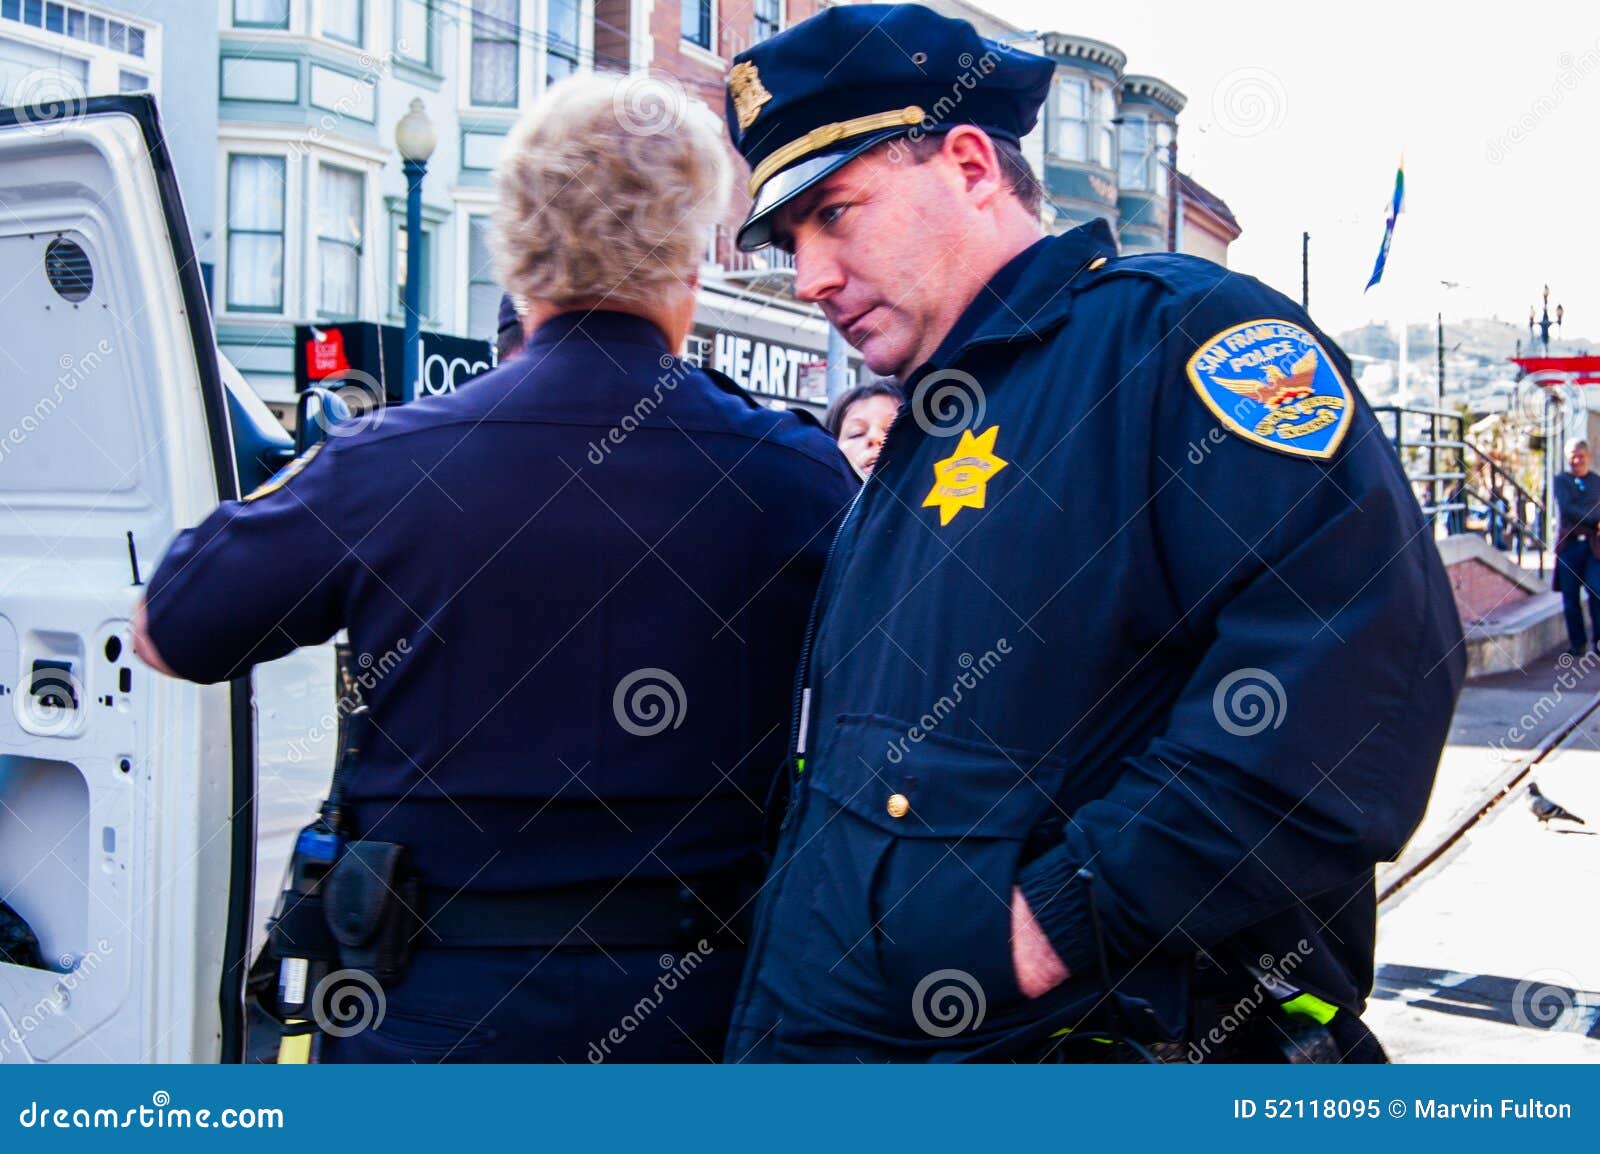 Naked Protesters Editorial Image Image Of Arrested Nudity 52118095